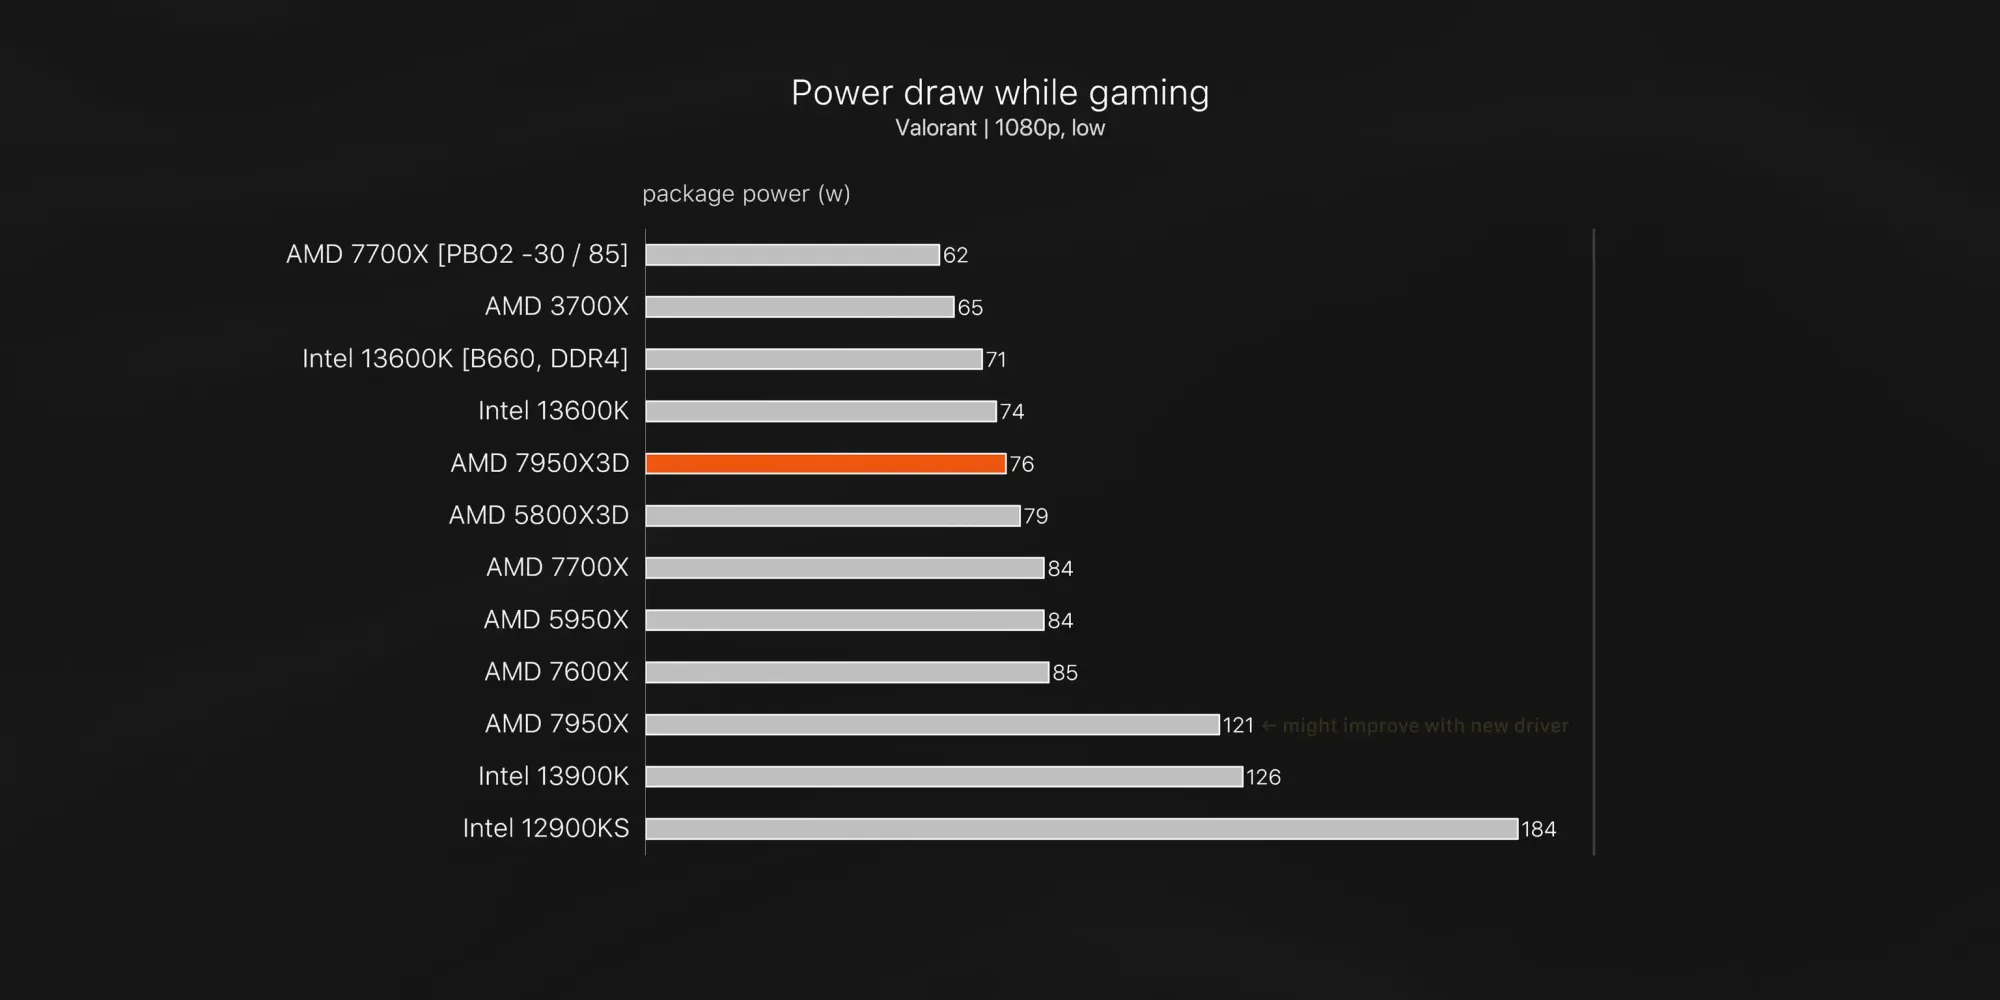 VALORANT Power Draw while Gaming 7950X3D